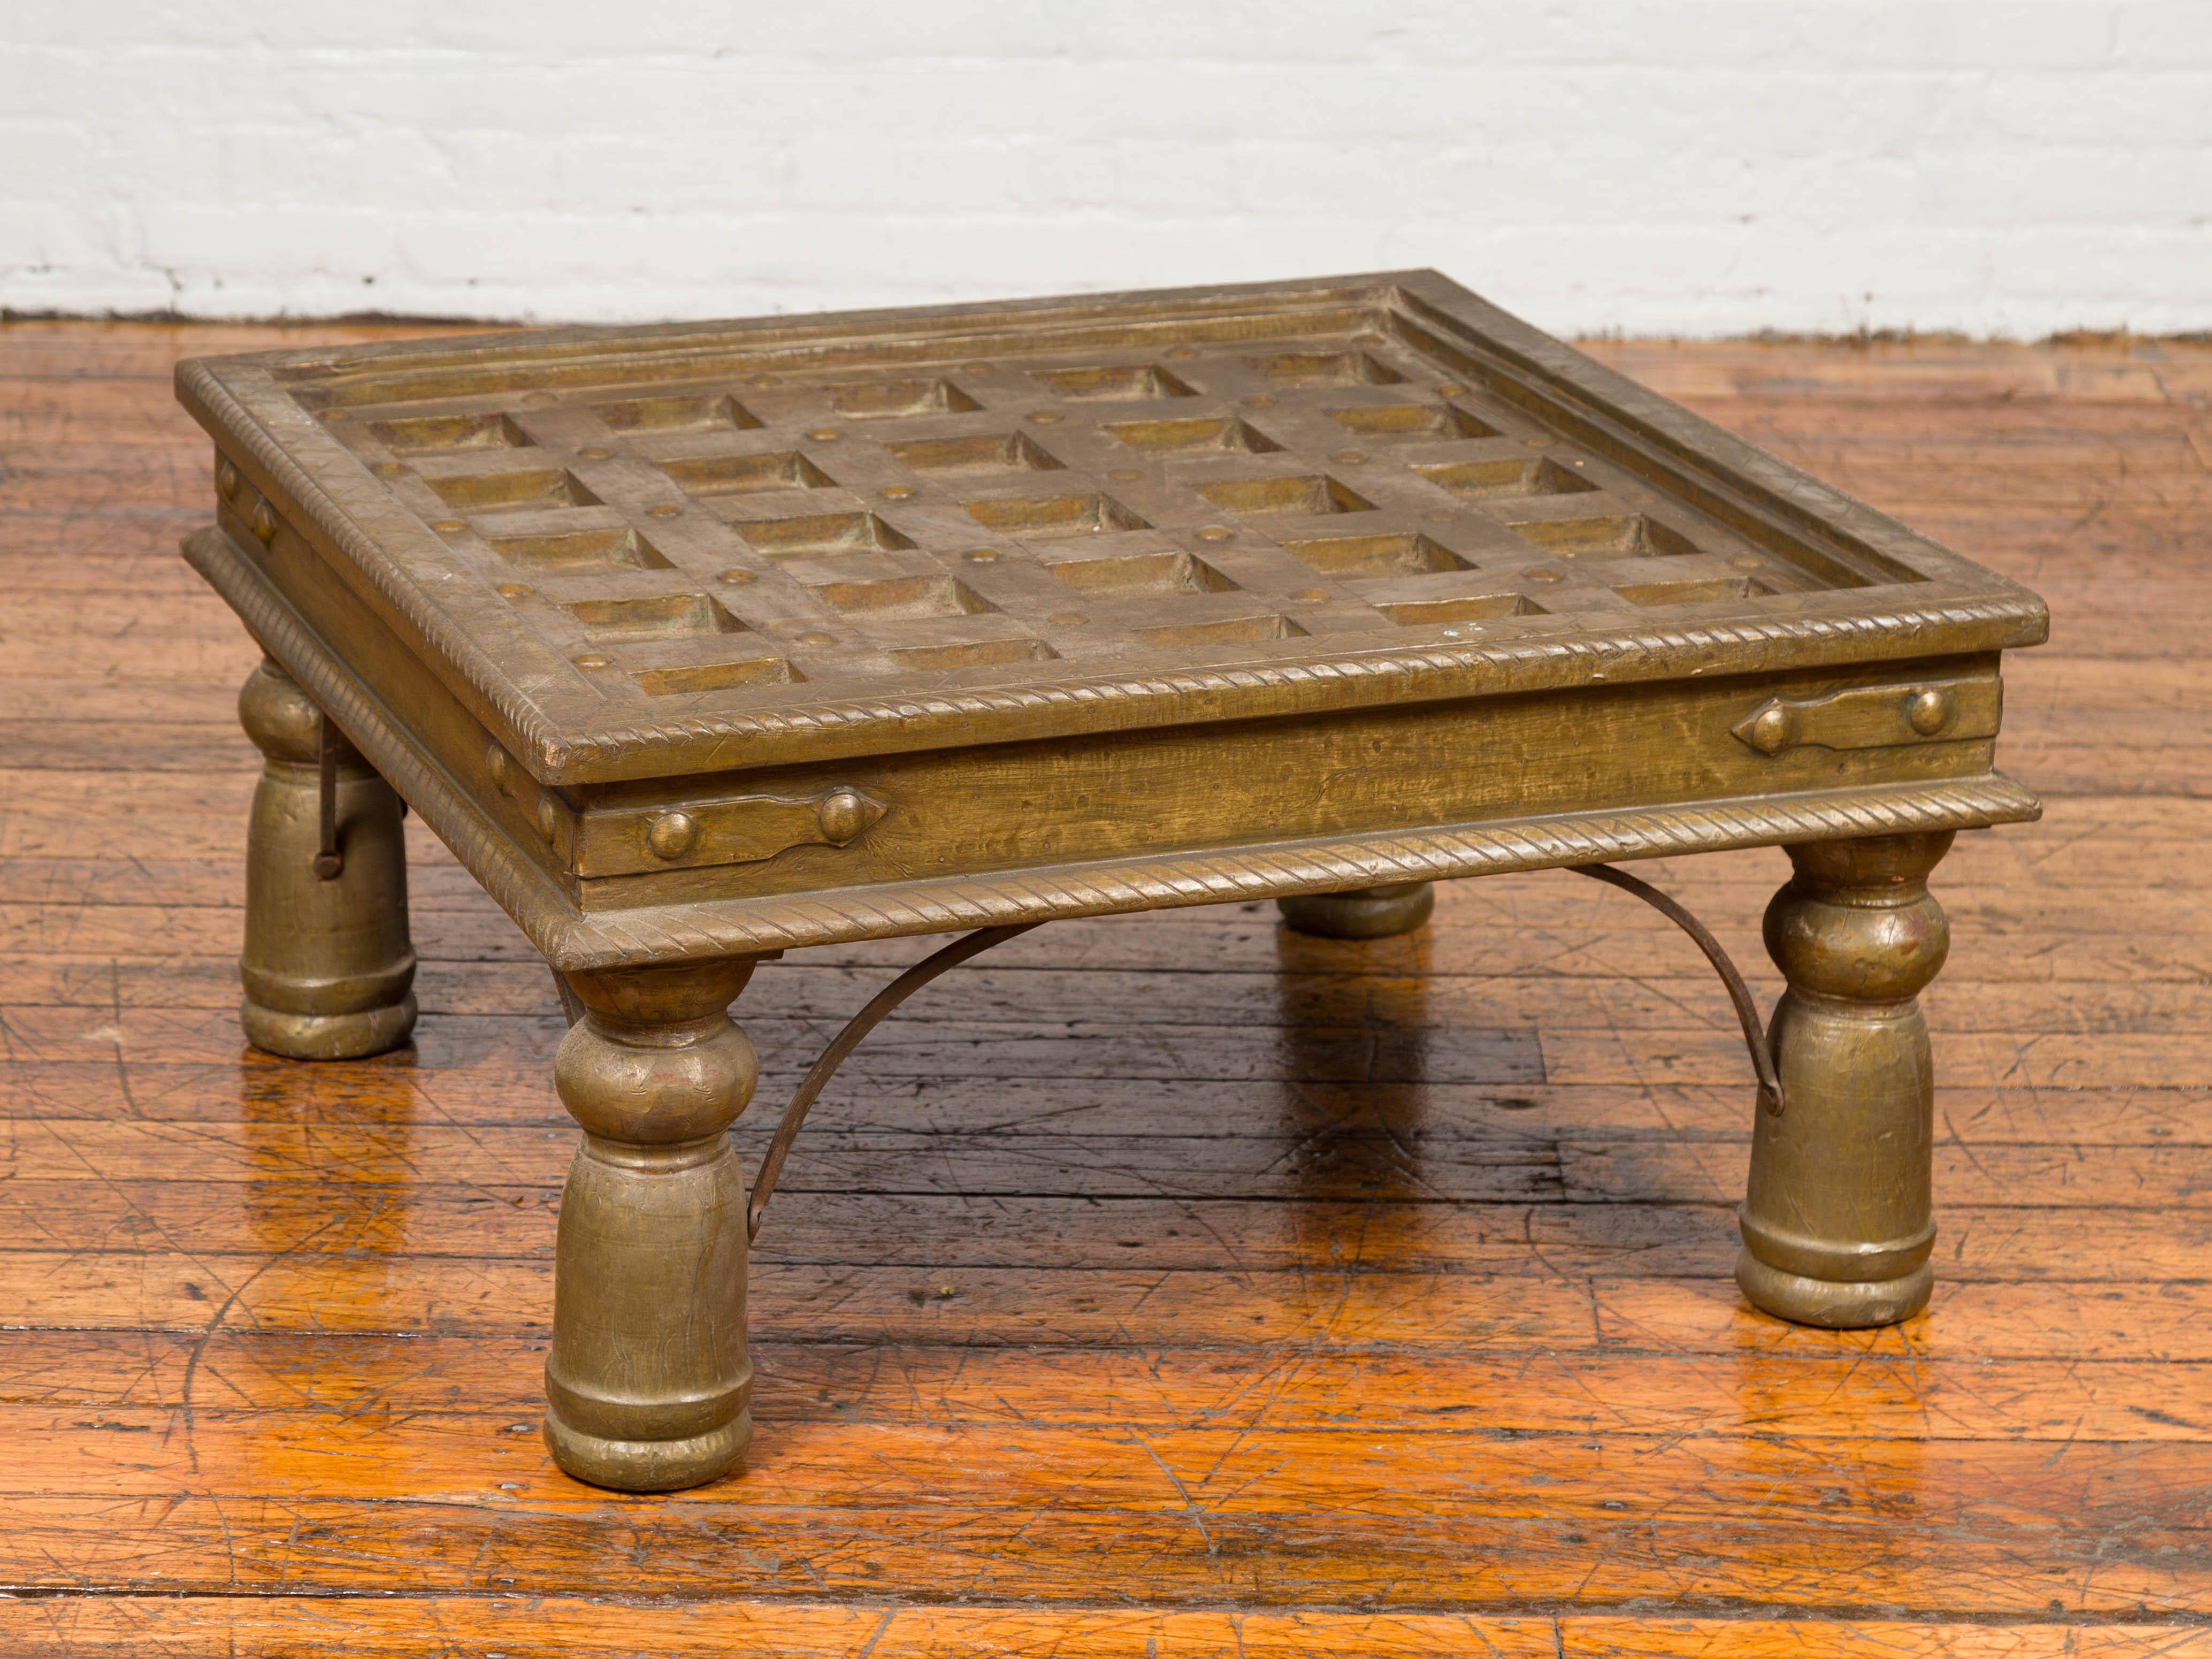 An antique Indian geometric wood and distressed brass window grate made into a coffee table. Born in India during the 19th century, this charming coffee table is made of a window grate, made of a wood composition structure bound with distressed